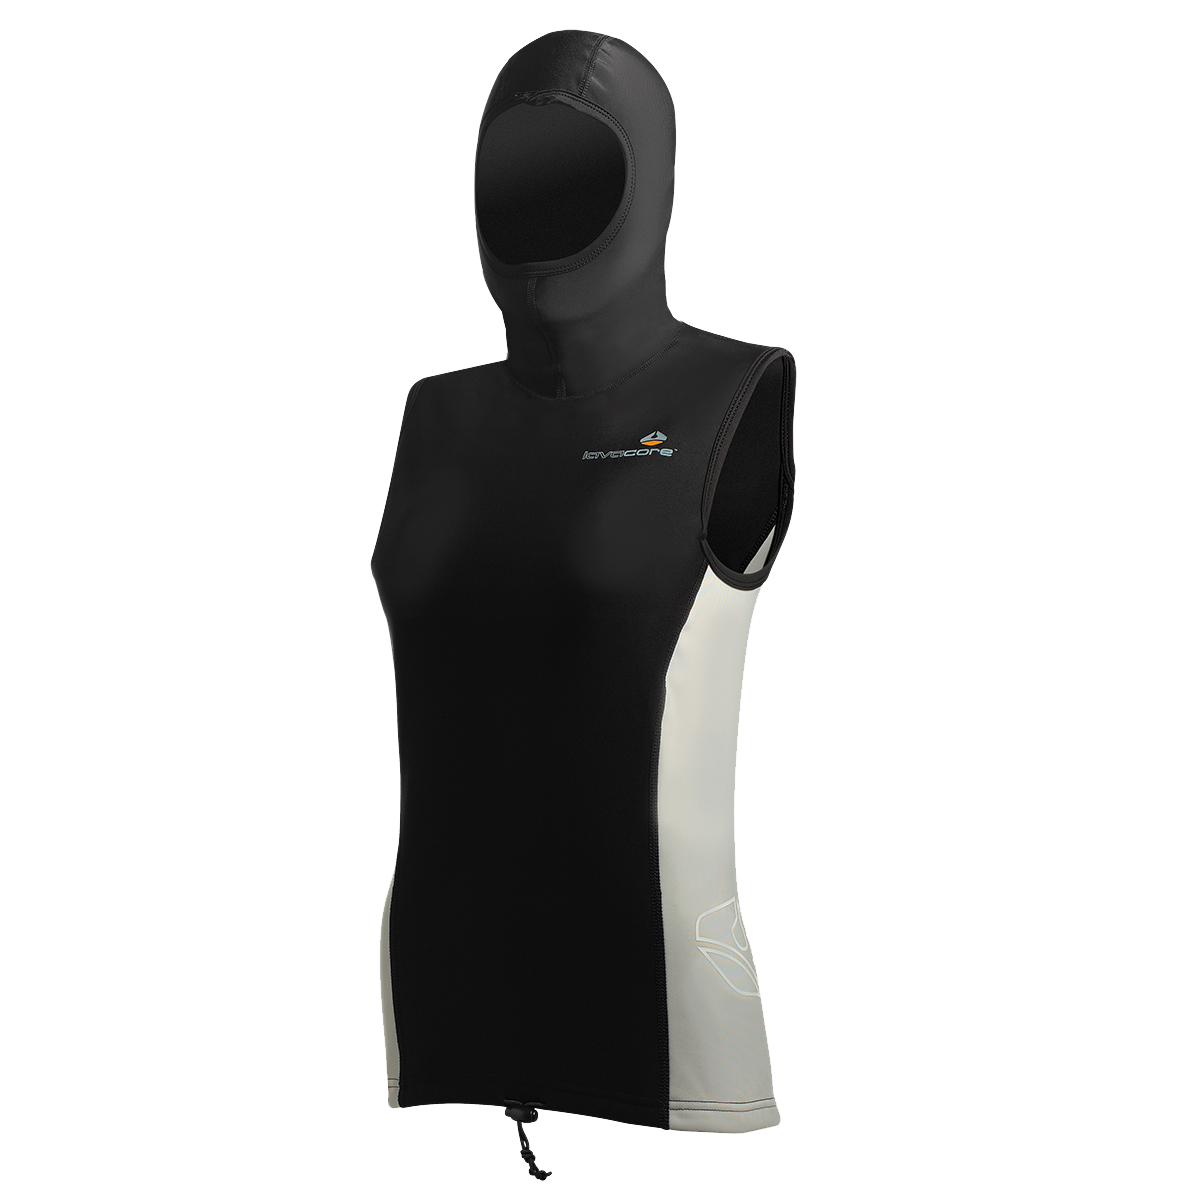 Details about   Lavacore Unisex Polytherm Hood for Watersports 815-7017-51 Xsmall 